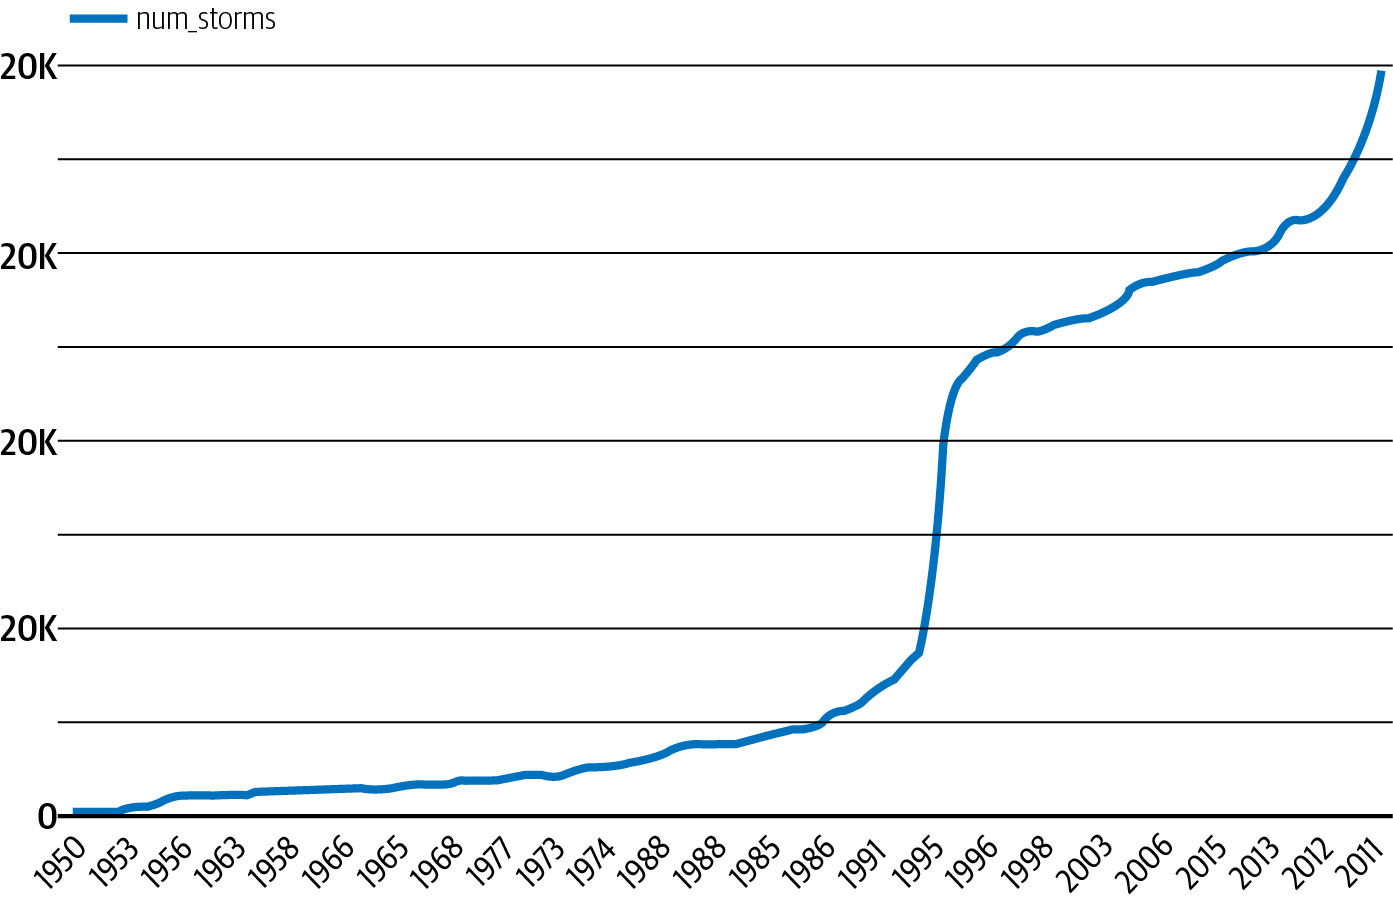 Number of severe storms reported in a year, as recorded by NOAA from 1950 to 2011.